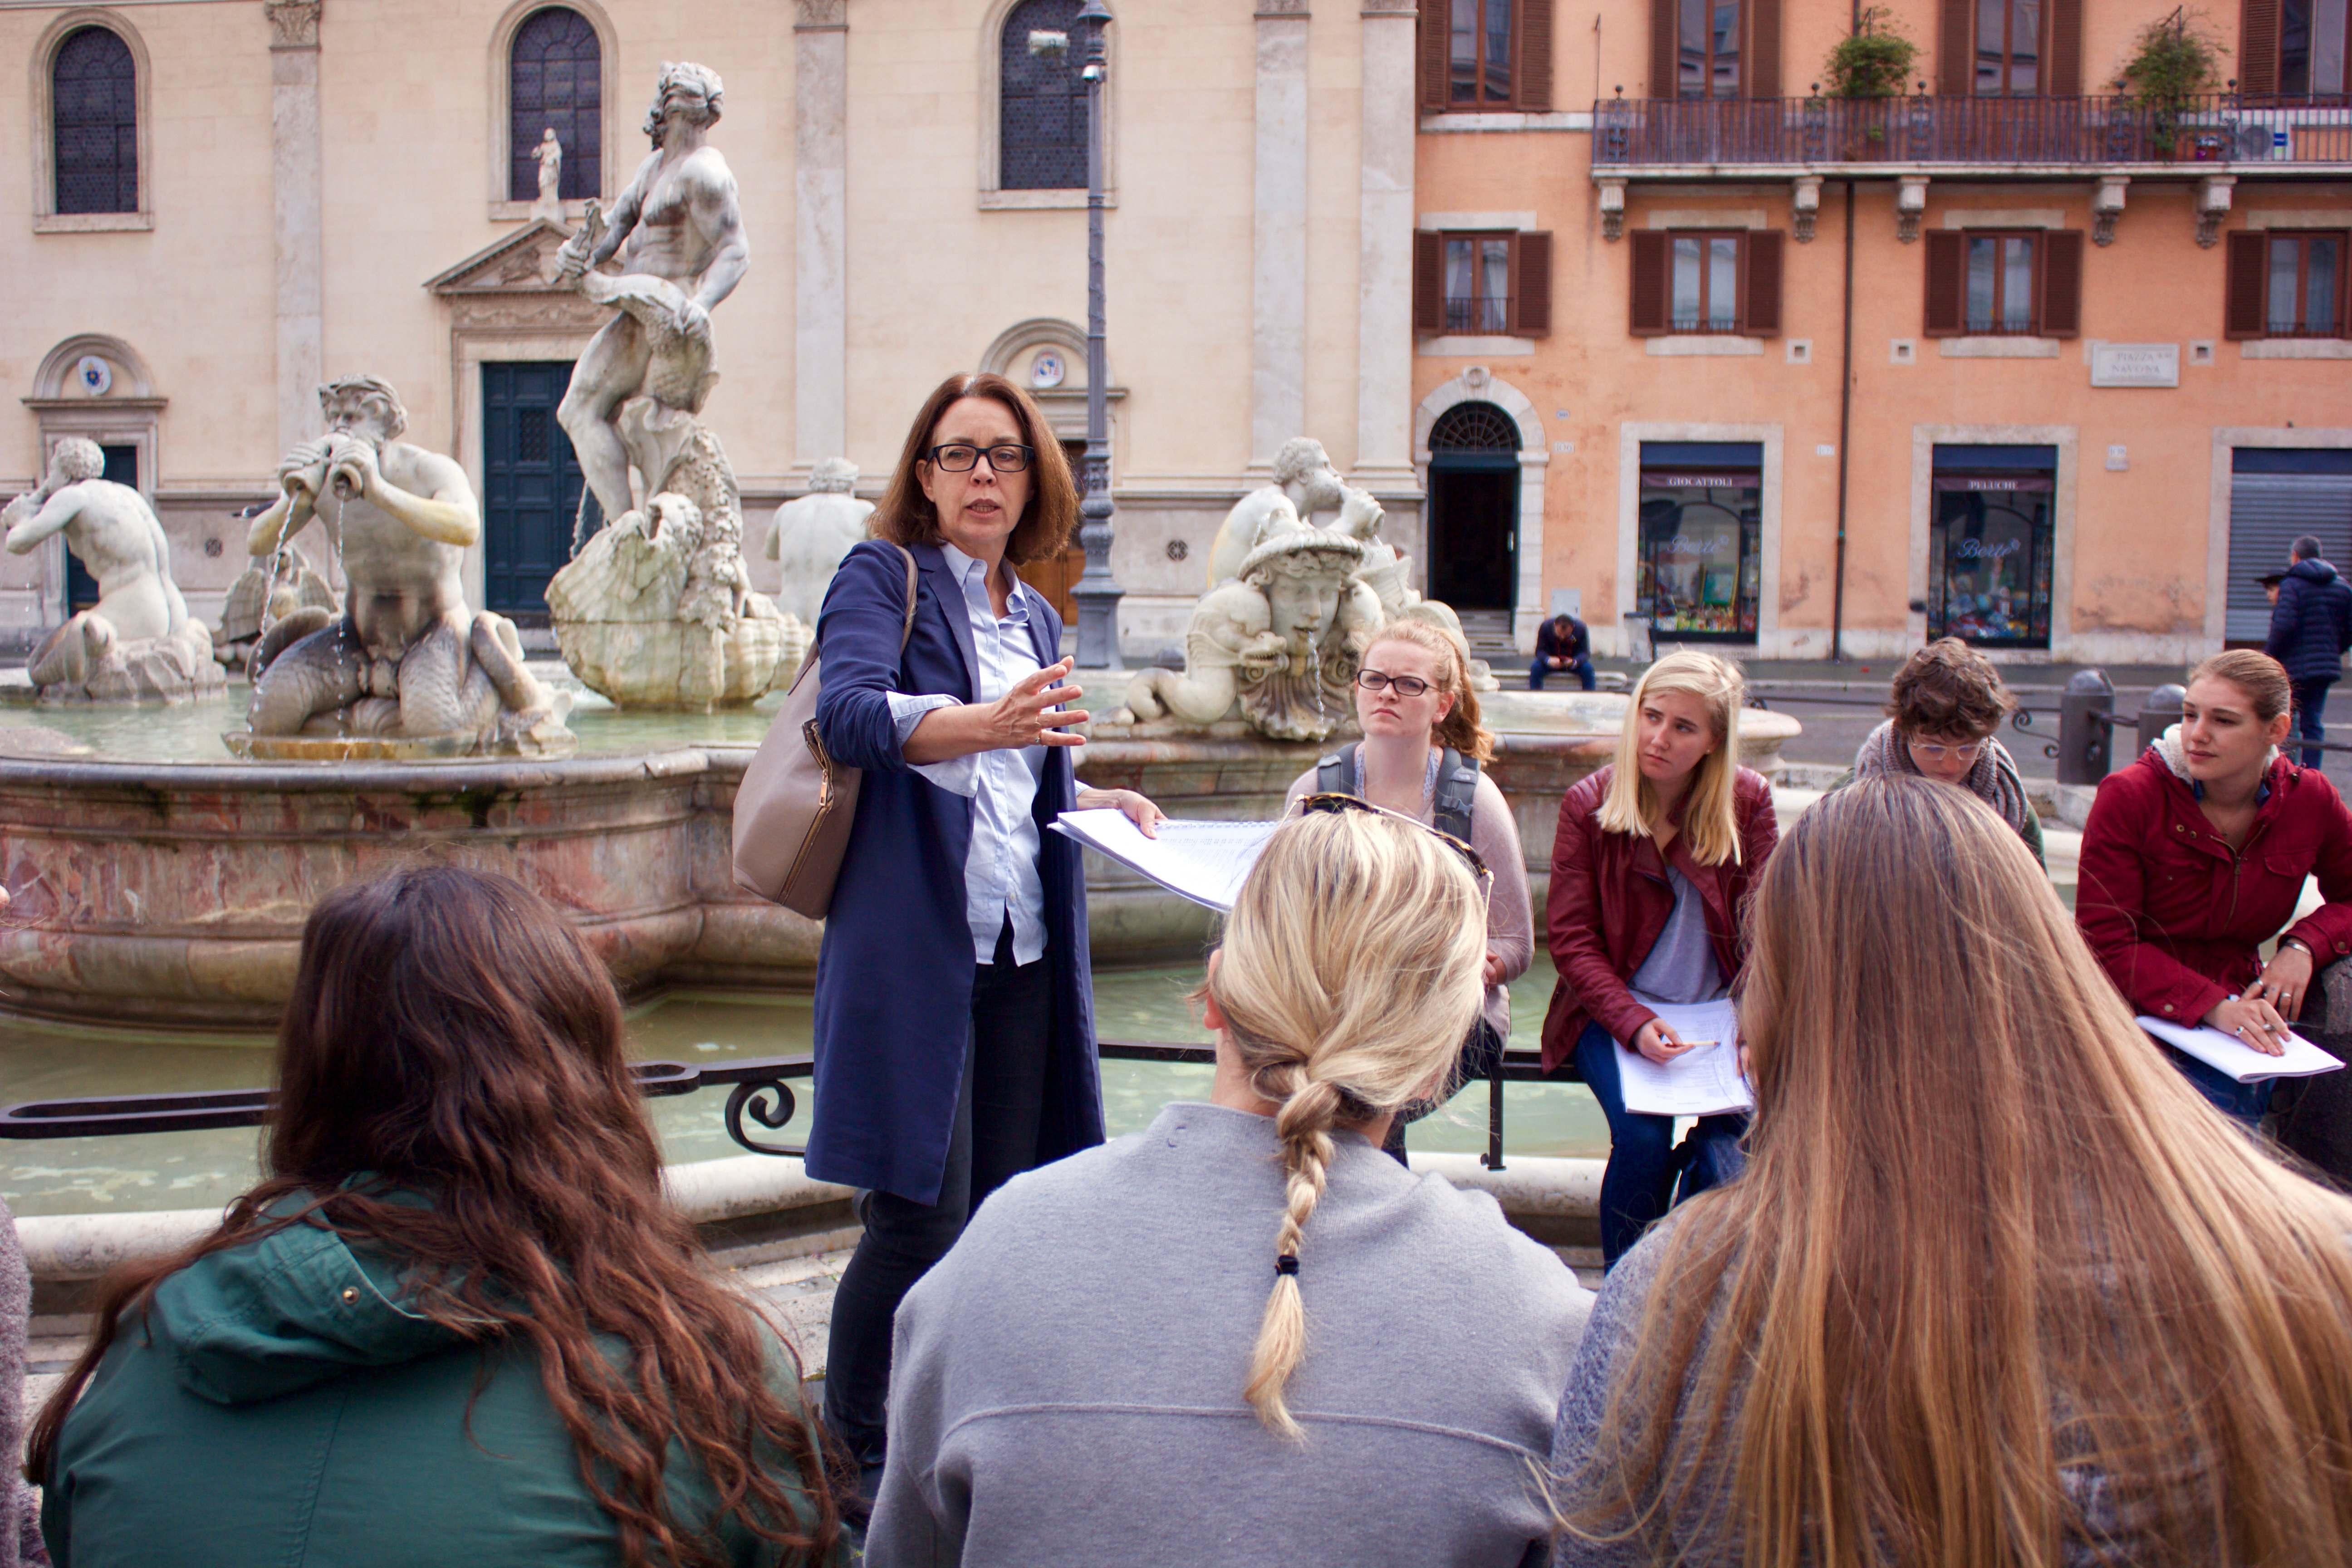 May 5 study art history in Rome